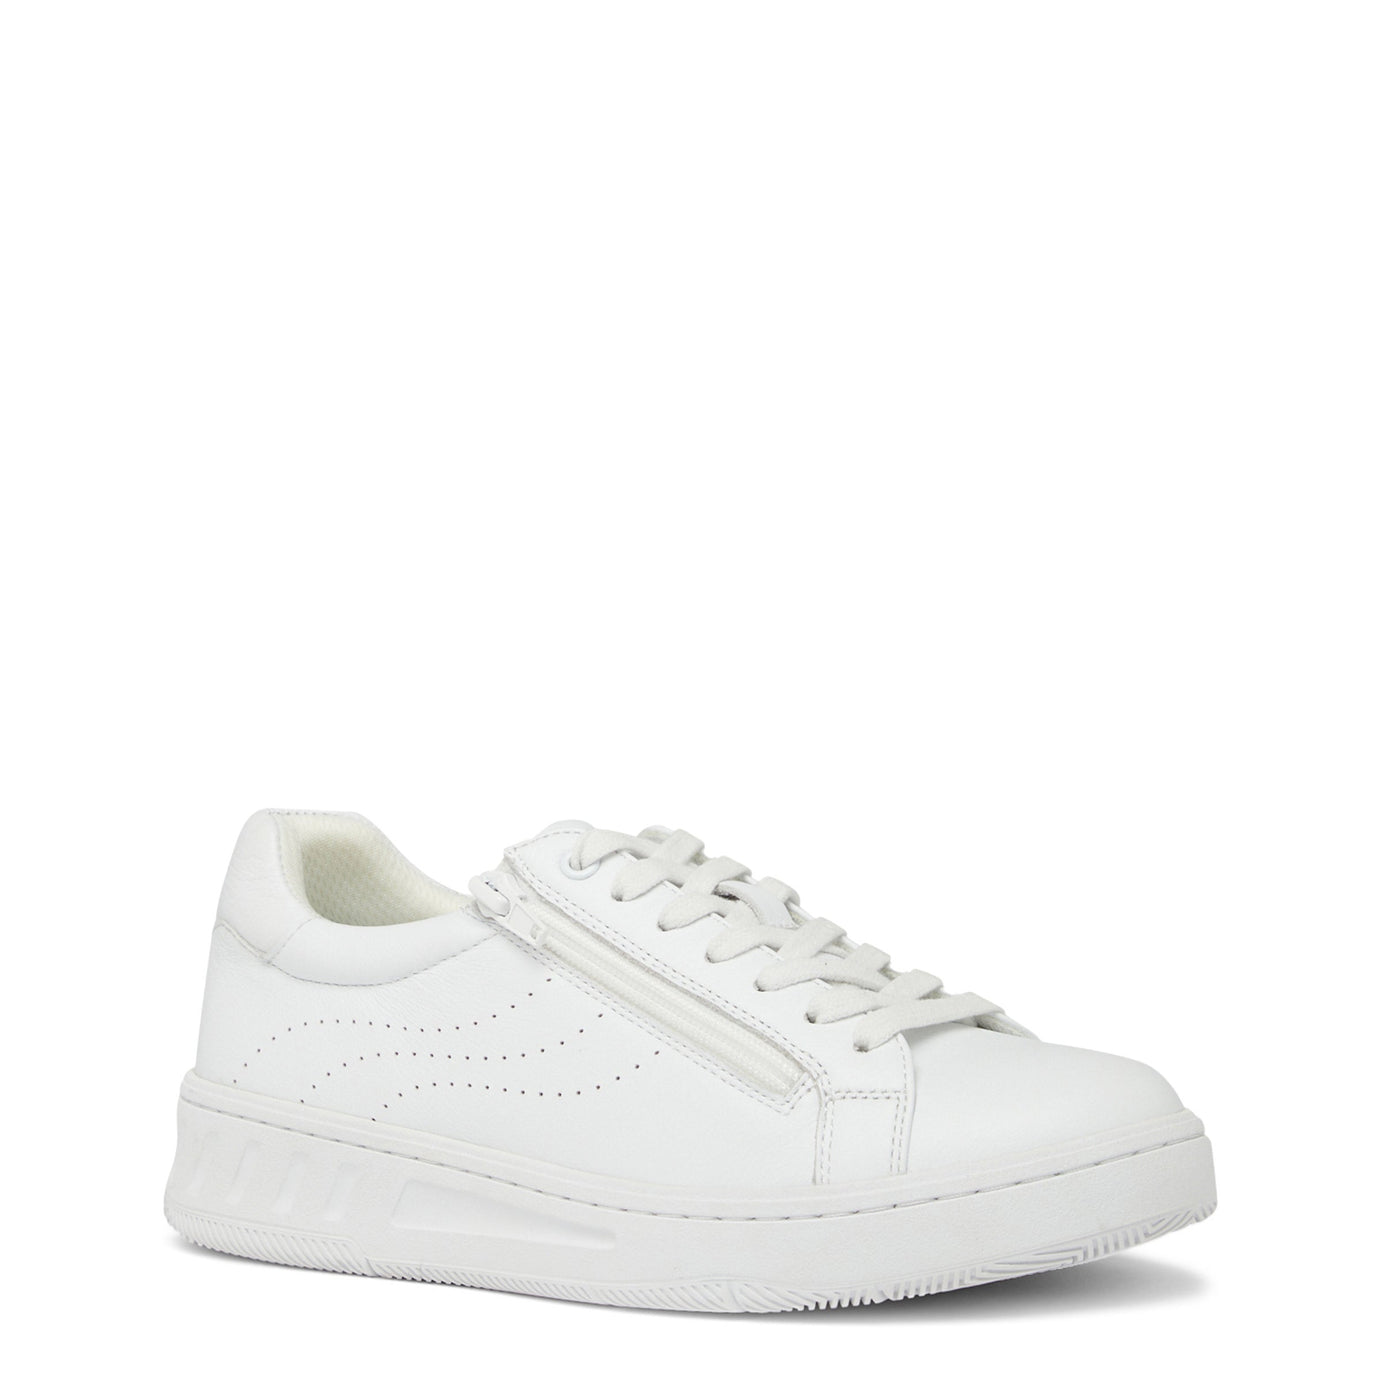 HUSH PUPPIES SPIN WHITE - Women sneakers - Collective Shoes 